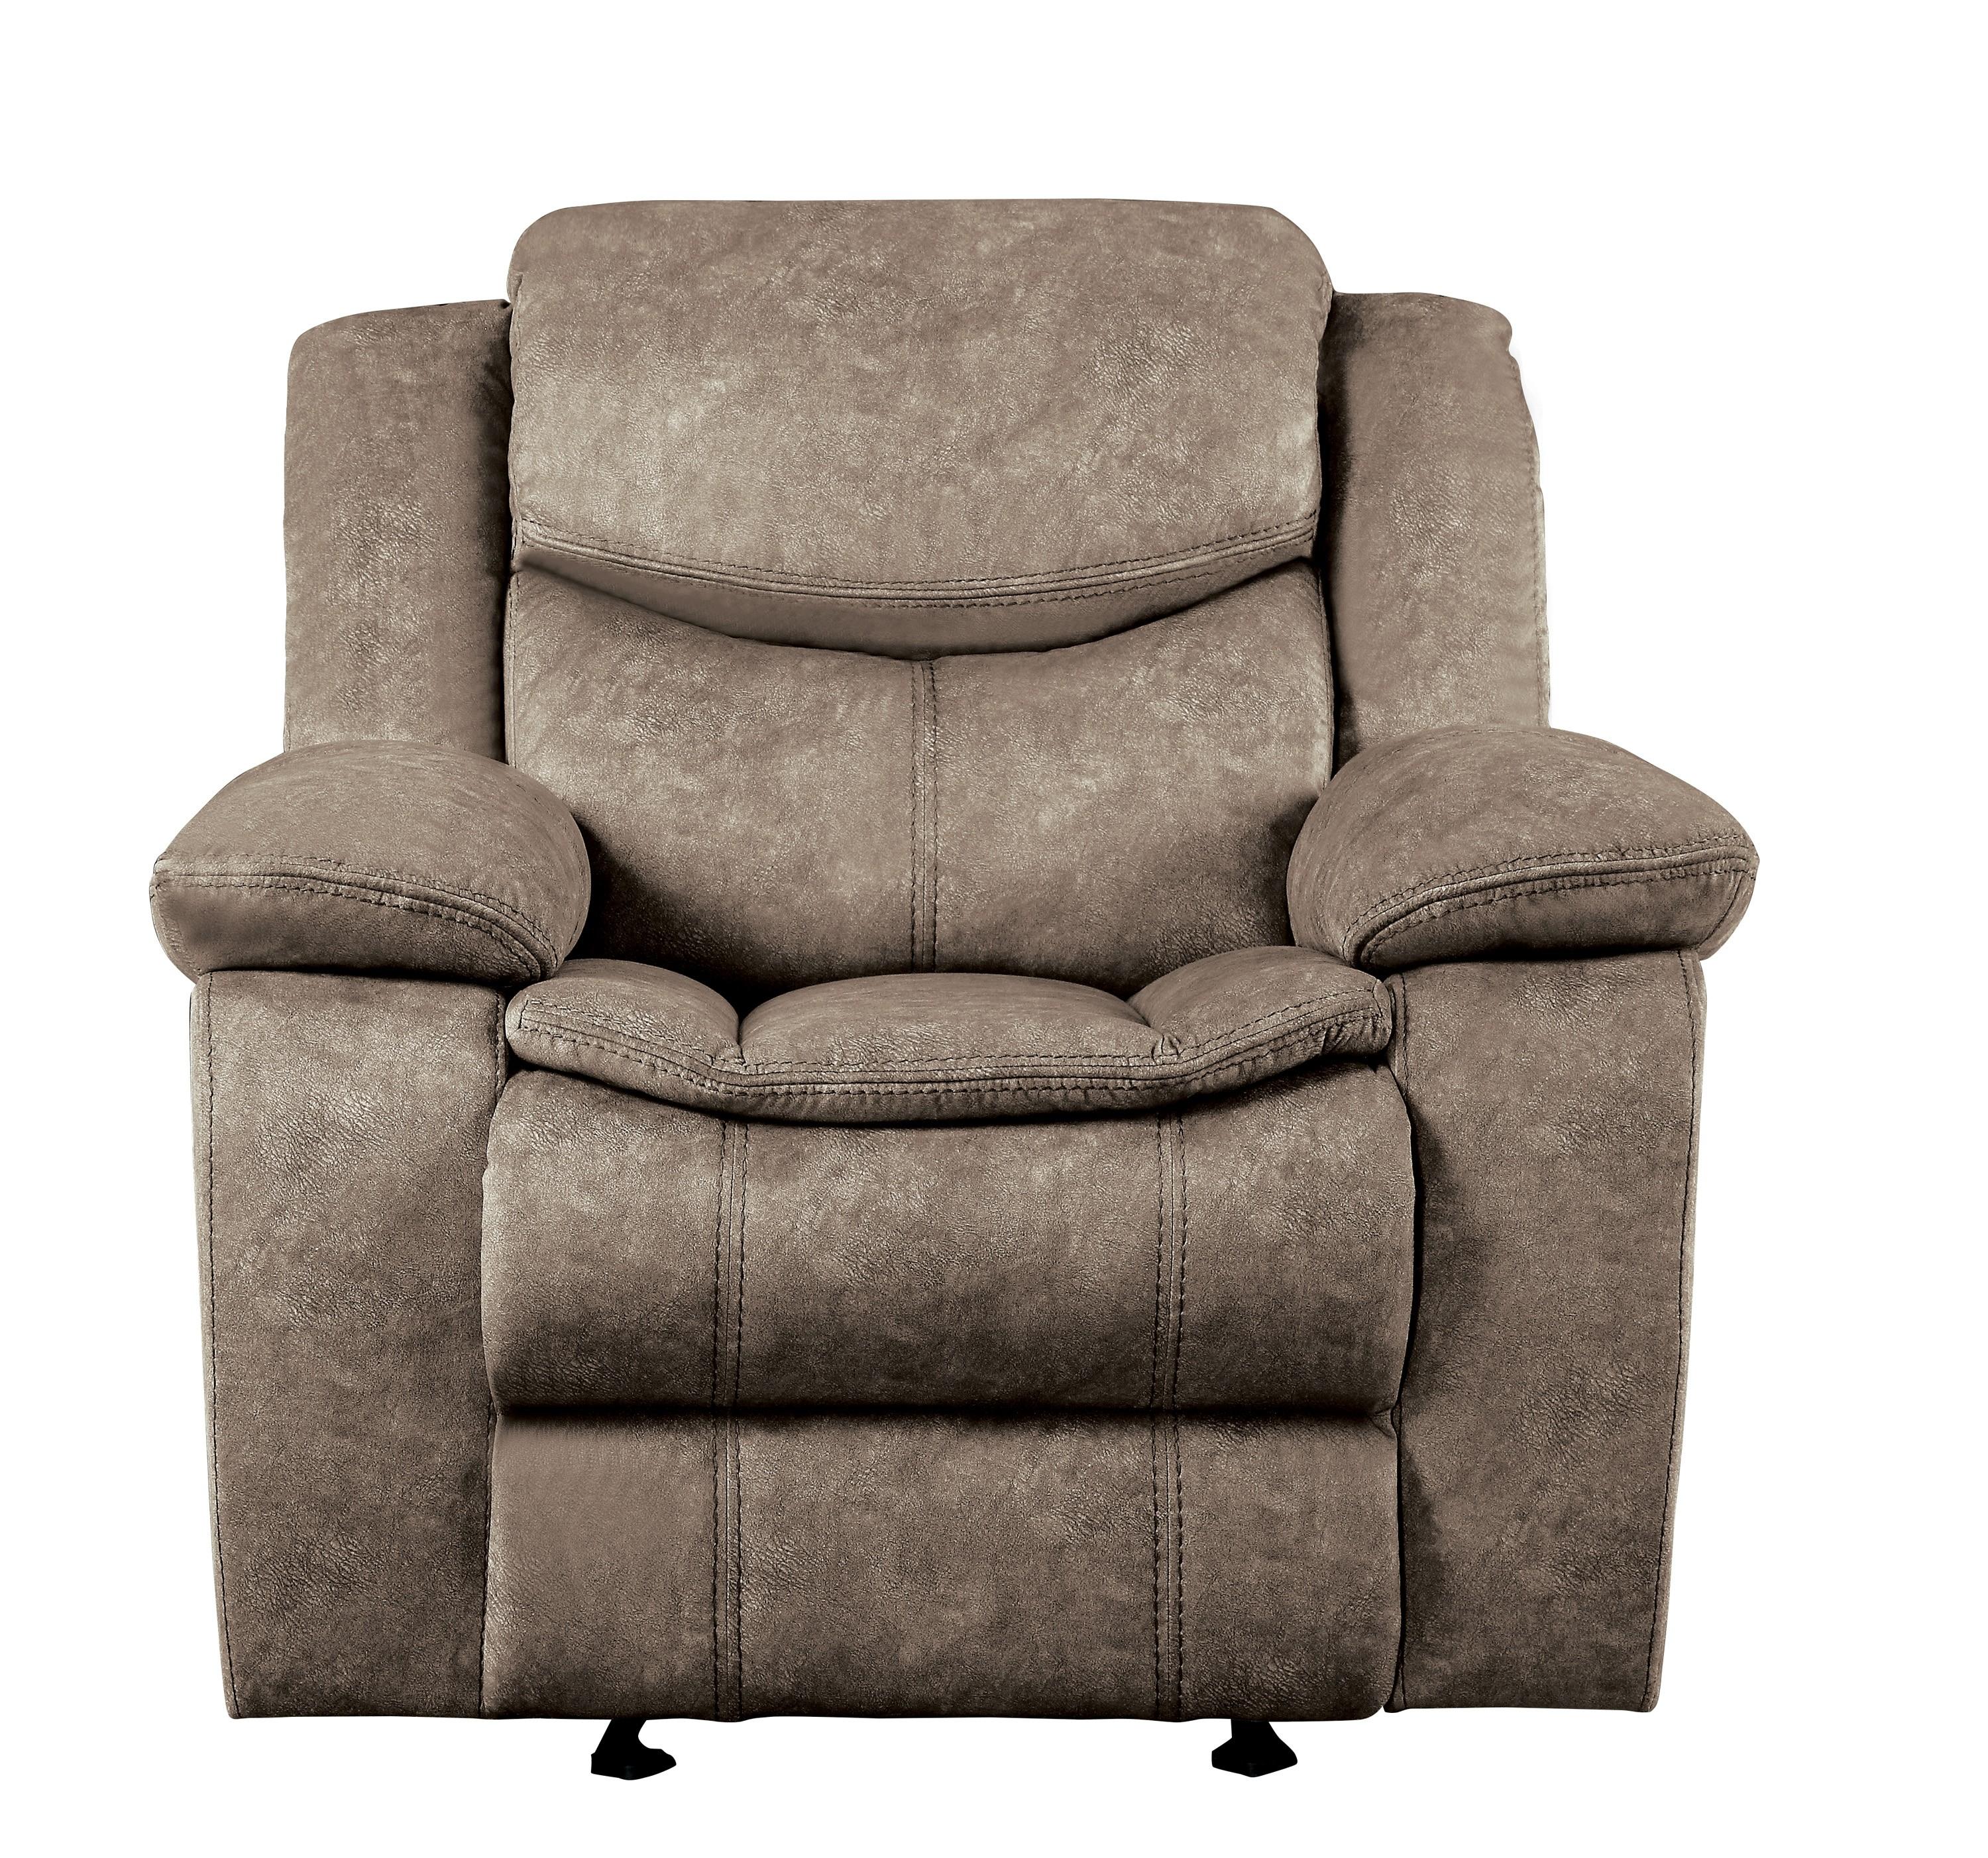 Transitional Reclining Chair 8230FBR-1 Bastrop 8230FBR-1 in Brown Microfiber